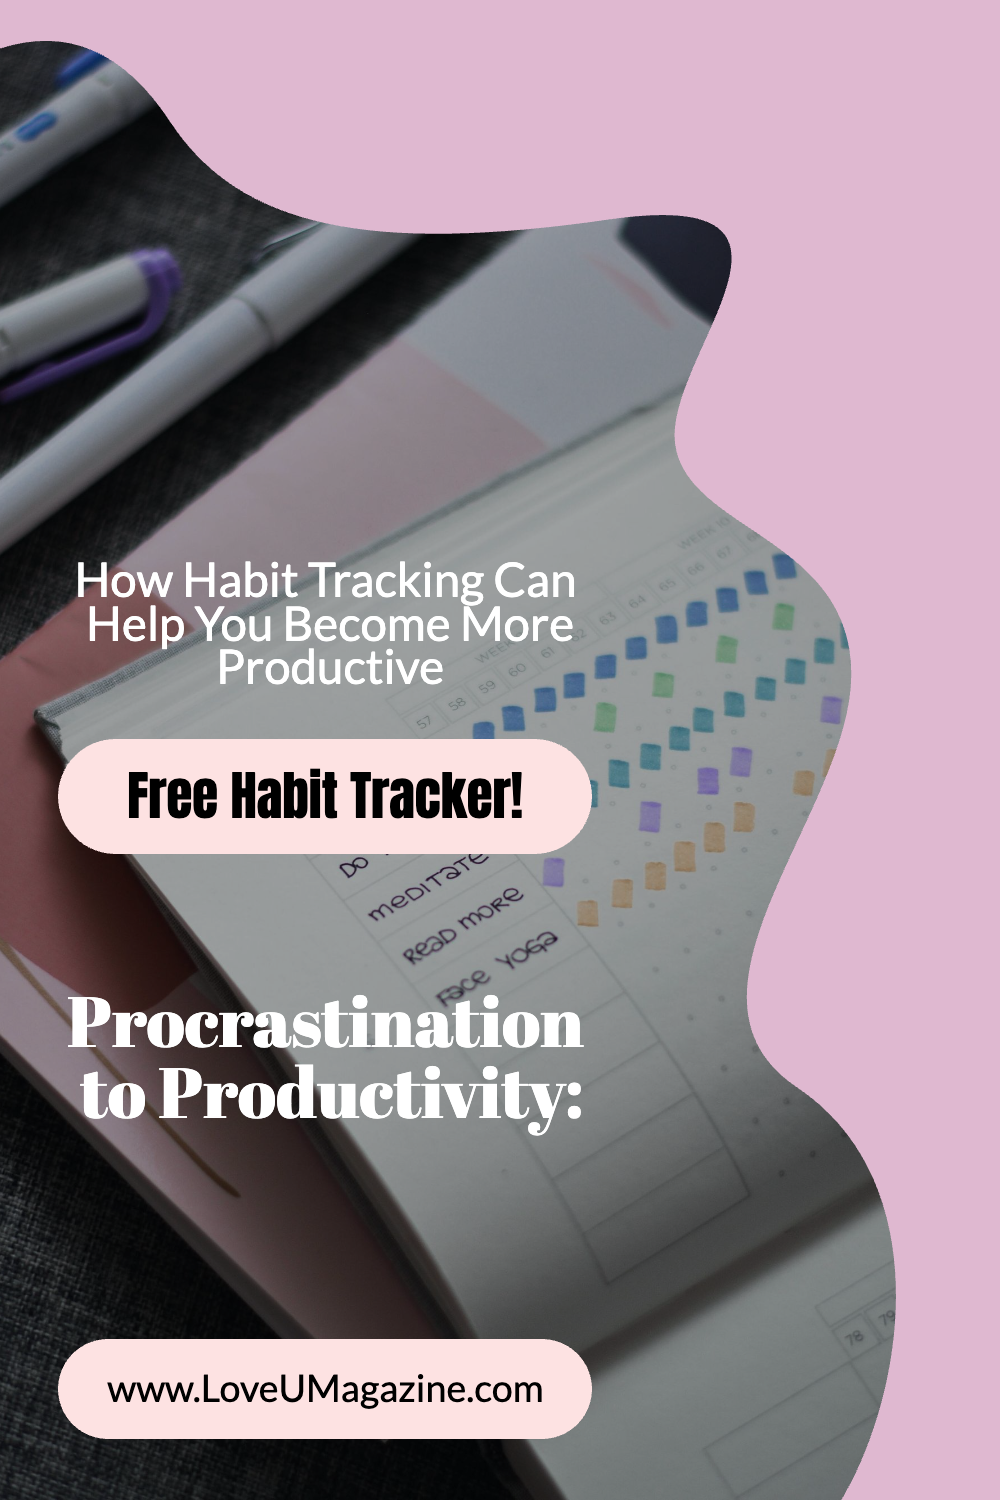 Procrastination to Productivity: How Habit Tracking Can Help You Become More Productive